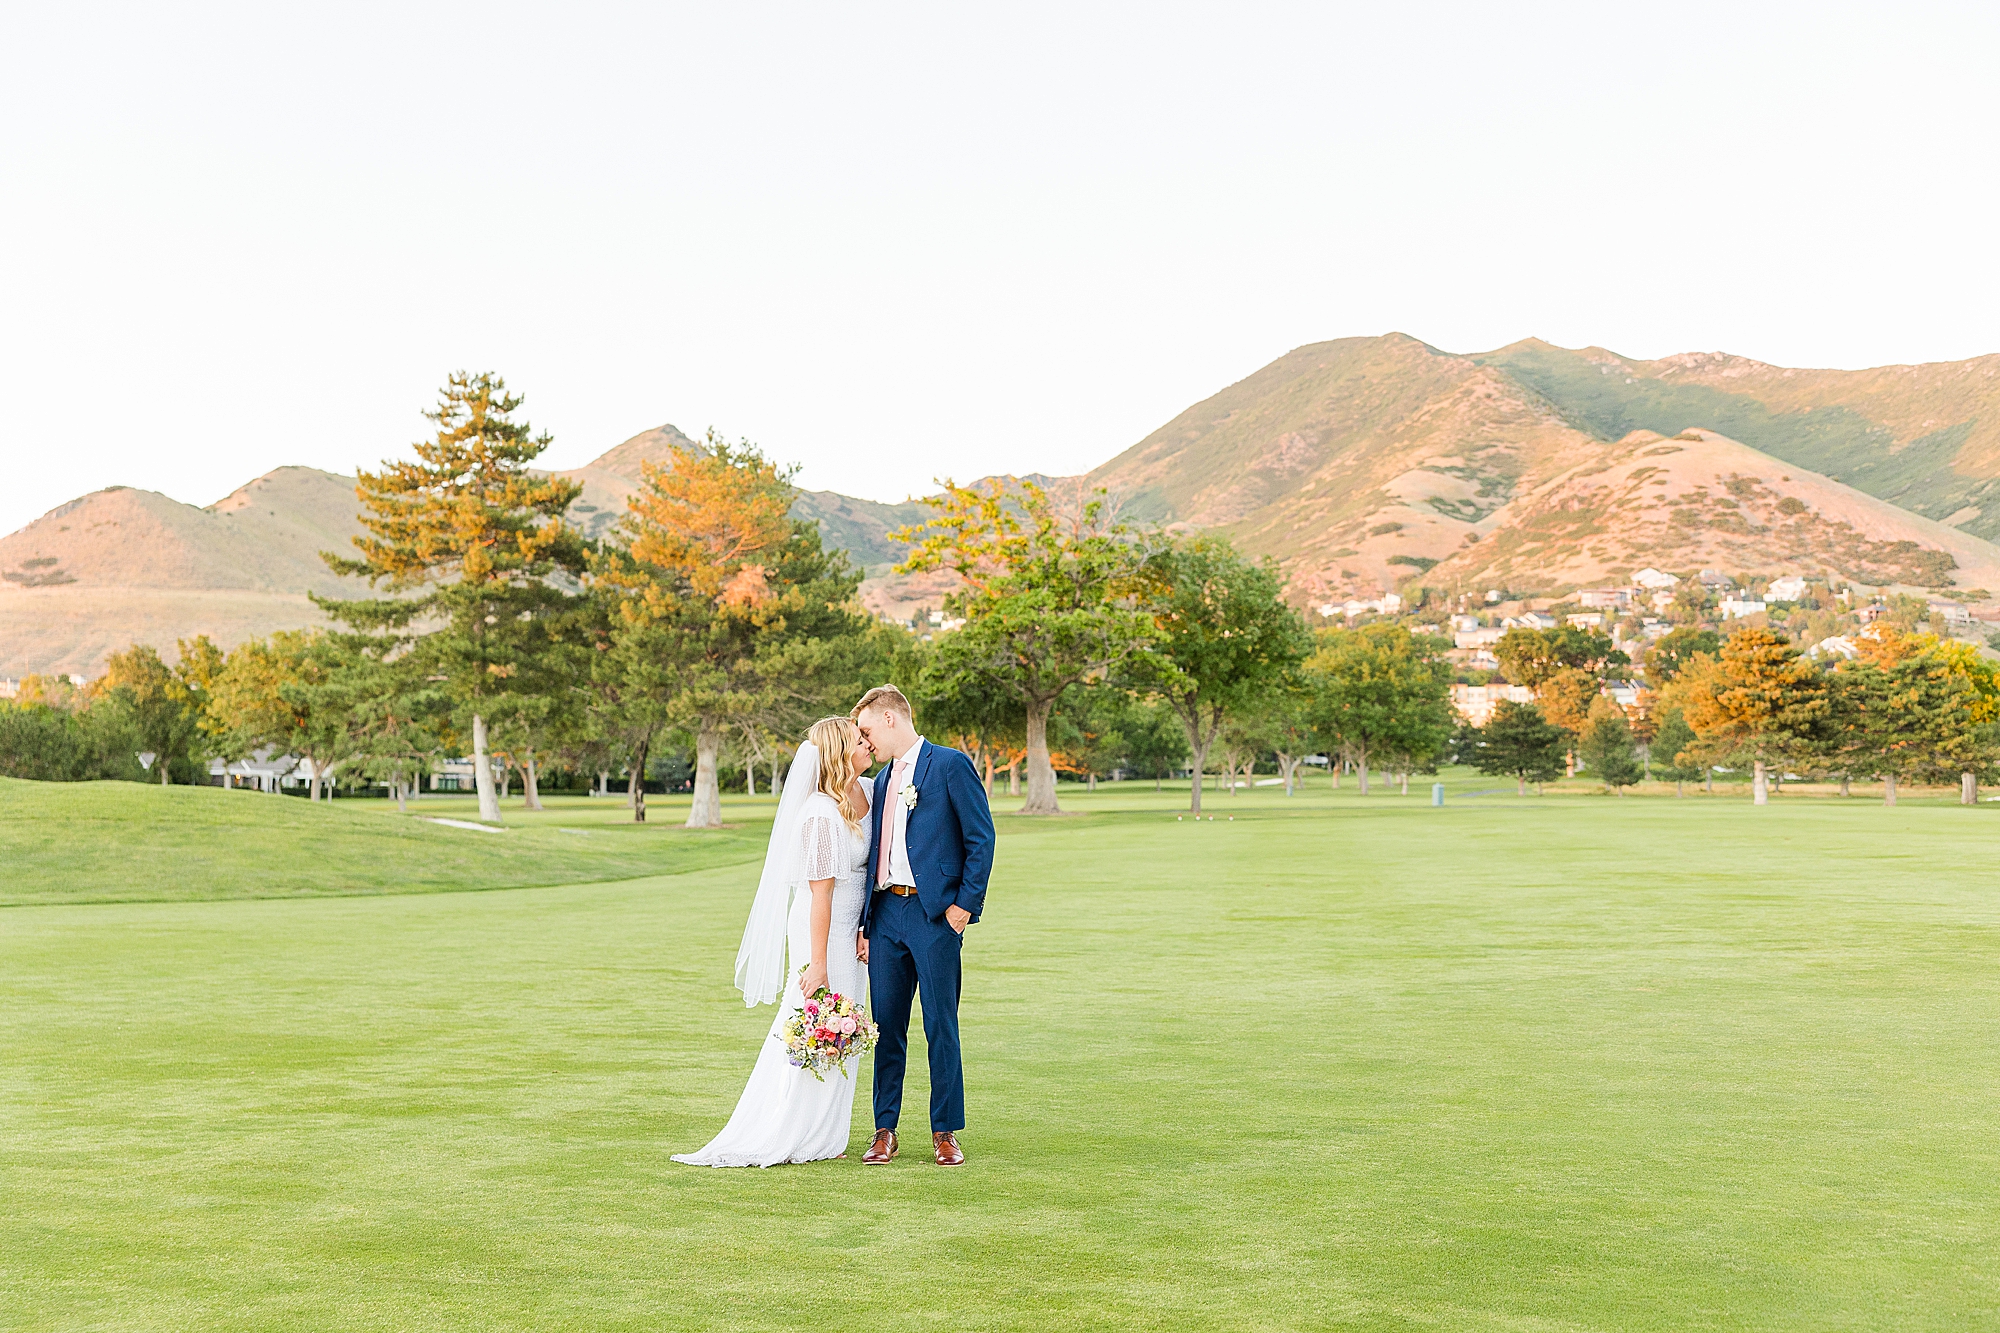 A picturesque view of the golf course at sunset, providing a breathtaking backdrop for the wedding celebration.
